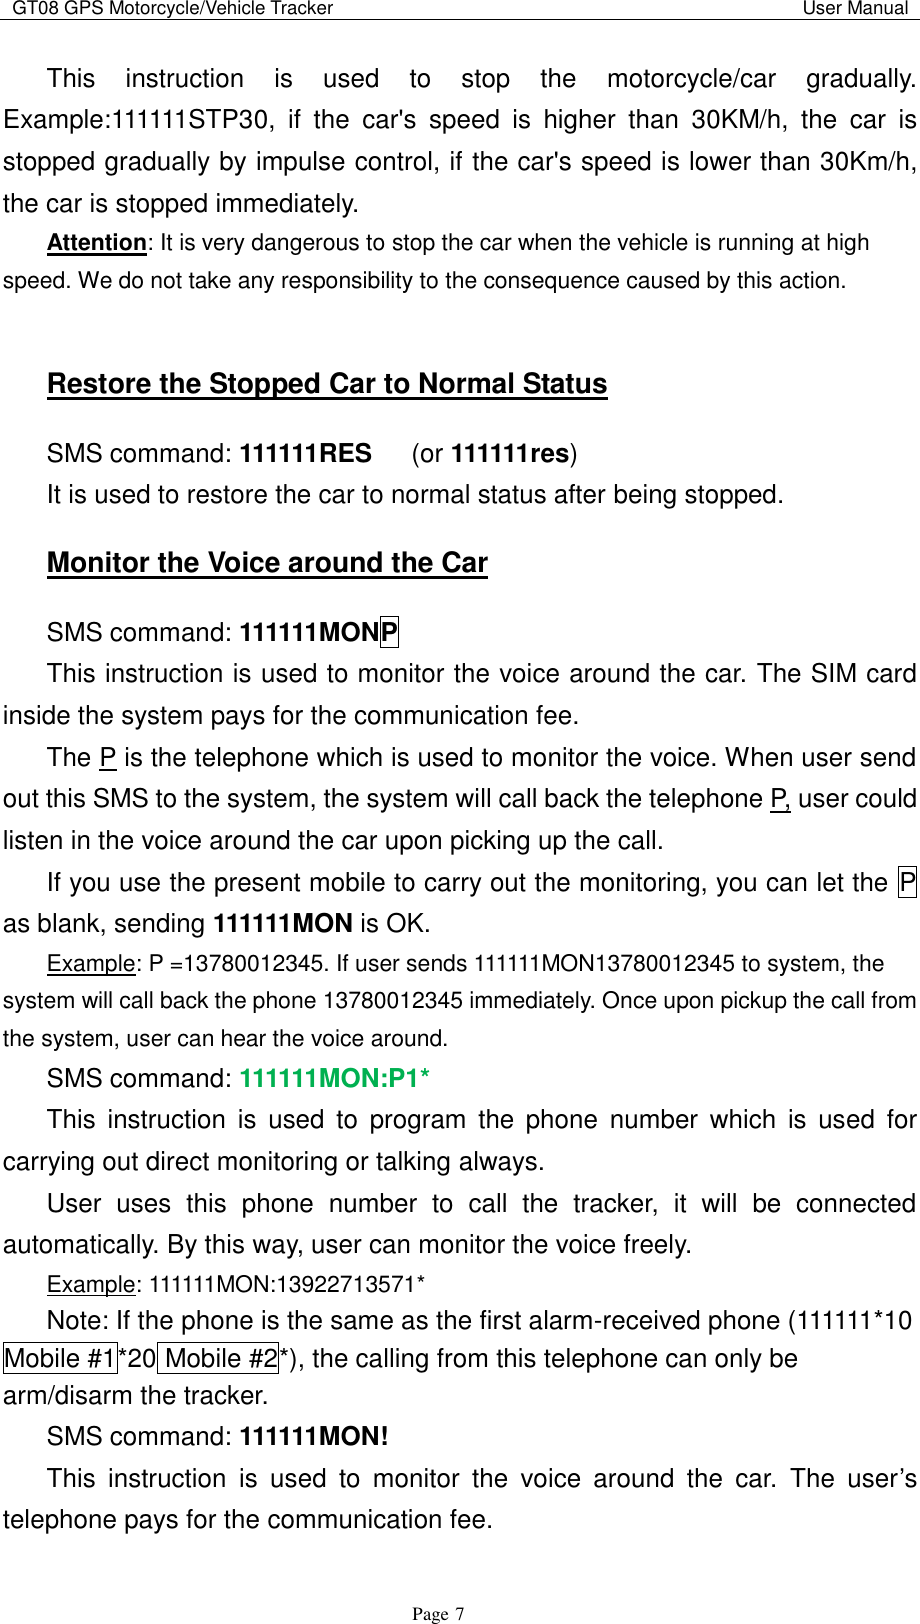 GT08 GPS Motorcycle/Vehicle Tracker                                                                                           User Manual                                     Page   7 This  instruction  is  used  to  stop  the  motorcycle/car  gradually. Example:111111STP30,  if  the  car&apos;s  speed  is  higher  than  30KM/h,  the  car  is stopped gradually by impulse control, if the car&apos;s speed is lower than 30Km/h, the car is stopped immediately. Attention: It is very dangerous to stop the car when the vehicle is running at high speed. We do not take any responsibility to the consequence caused by this action.  Restore the Stopped Car to Normal Status SMS command: 111111RES    (or 111111res) It is used to restore the car to normal status after being stopped.   Monitor the Voice around the Car SMS command: 111111MONP This instruction is used to monitor the voice around the car. The SIM card inside the system pays for the communication fee. The P is the telephone which is used to monitor the voice. When user send out this SMS to the system, the system will call back the telephone P, user could listen in the voice around the car upon picking up the call. If you use the present mobile to carry out the monitoring, you can let the P as blank, sending 111111MON is OK. Example: P =13780012345. If user sends 111111MON13780012345 to system, the system will call back the phone 13780012345 immediately. Once upon pickup the call from the system, user can hear the voice around. SMS command: 111111MON:P1* This  instruction  is  used  to  program  the  phone  number  which  is  used  for carrying out direct monitoring or talking always. User  uses  this  phone  number  to  call  the  tracker,  it  will  be  connected automatically. By this way, user can monitor the voice freely. Example: 111111MON:13922713571* Note: If the phone is the same as the first alarm-received phone (111111*10 Mobile #1*20 Mobile #2*), the calling from this telephone can only be arm/disarm the tracker. SMS command: 111111MON! This  instruction  is  used  to  monitor  the  voice  around  the  car.  The  user‟s telephone pays for the communication fee. 